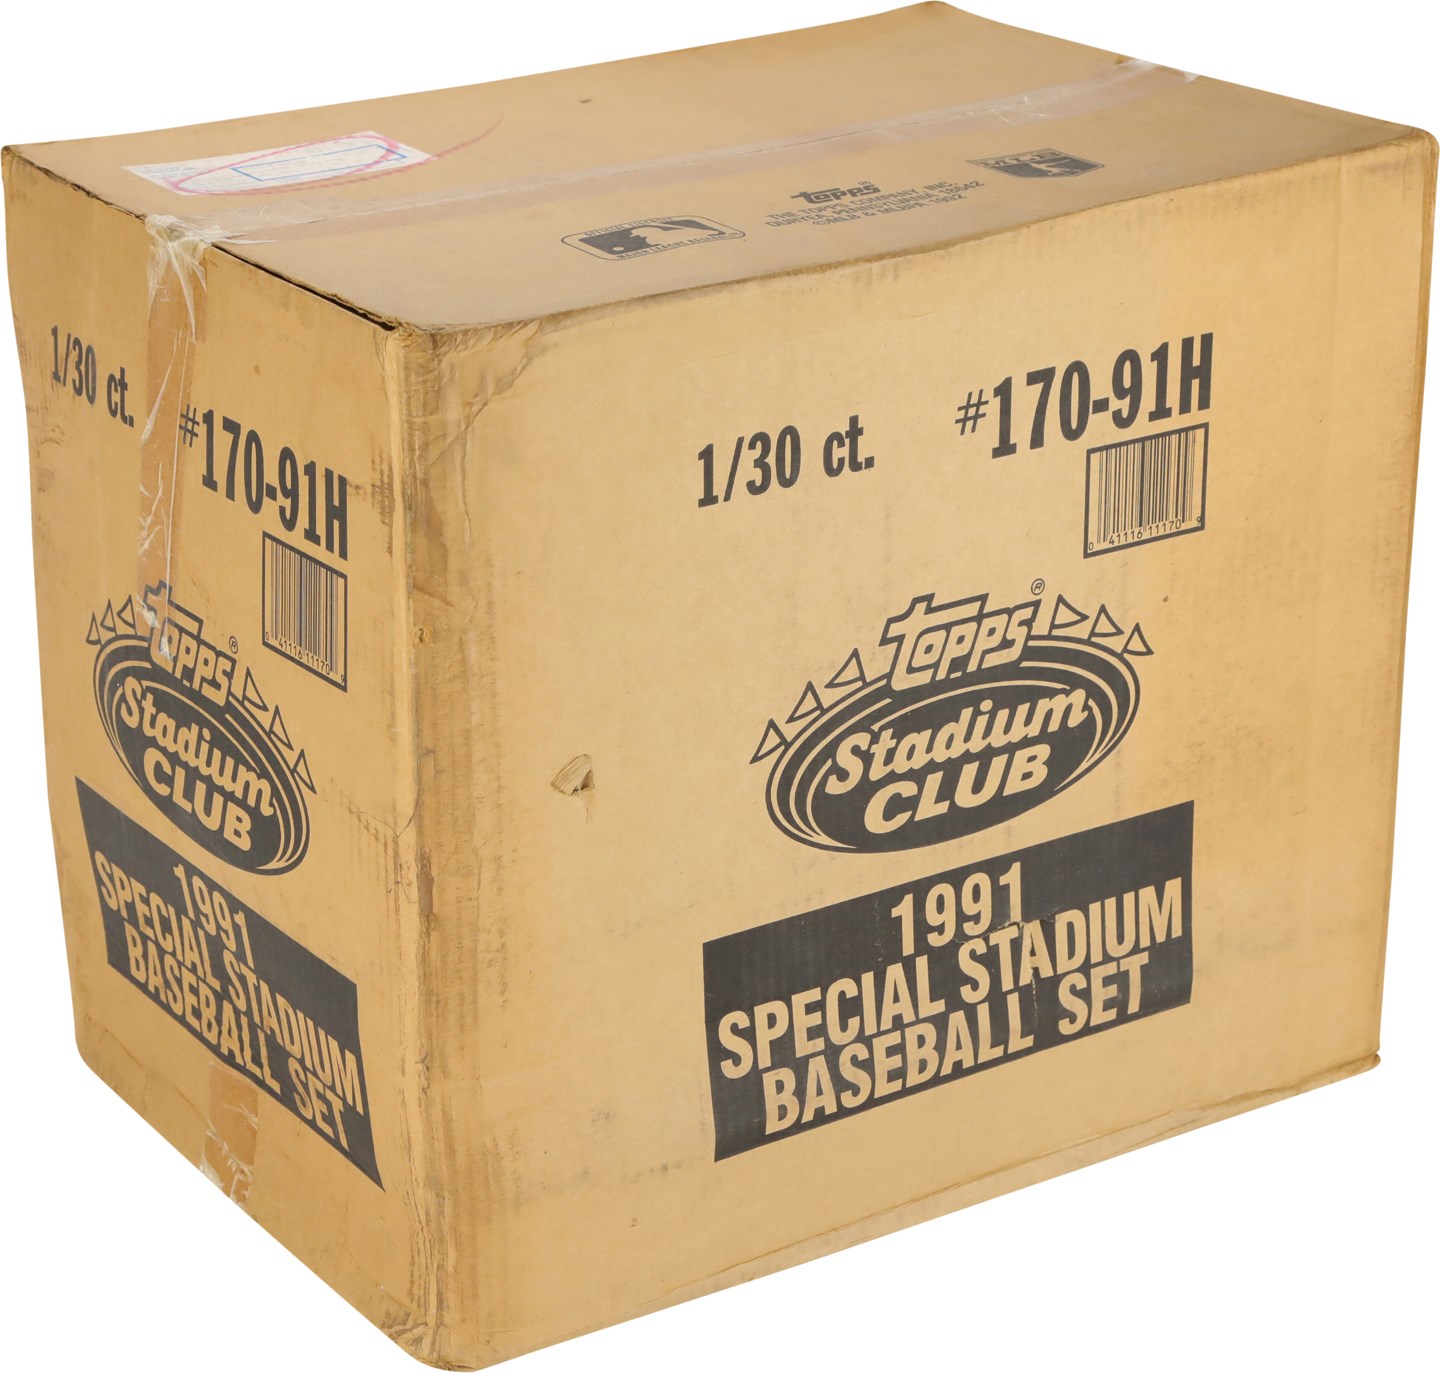 Unopened Boxes, Packs And Cases - 1991 Topps Stadium Club Baseball Special Stadium Sky Dome Set Case (1)